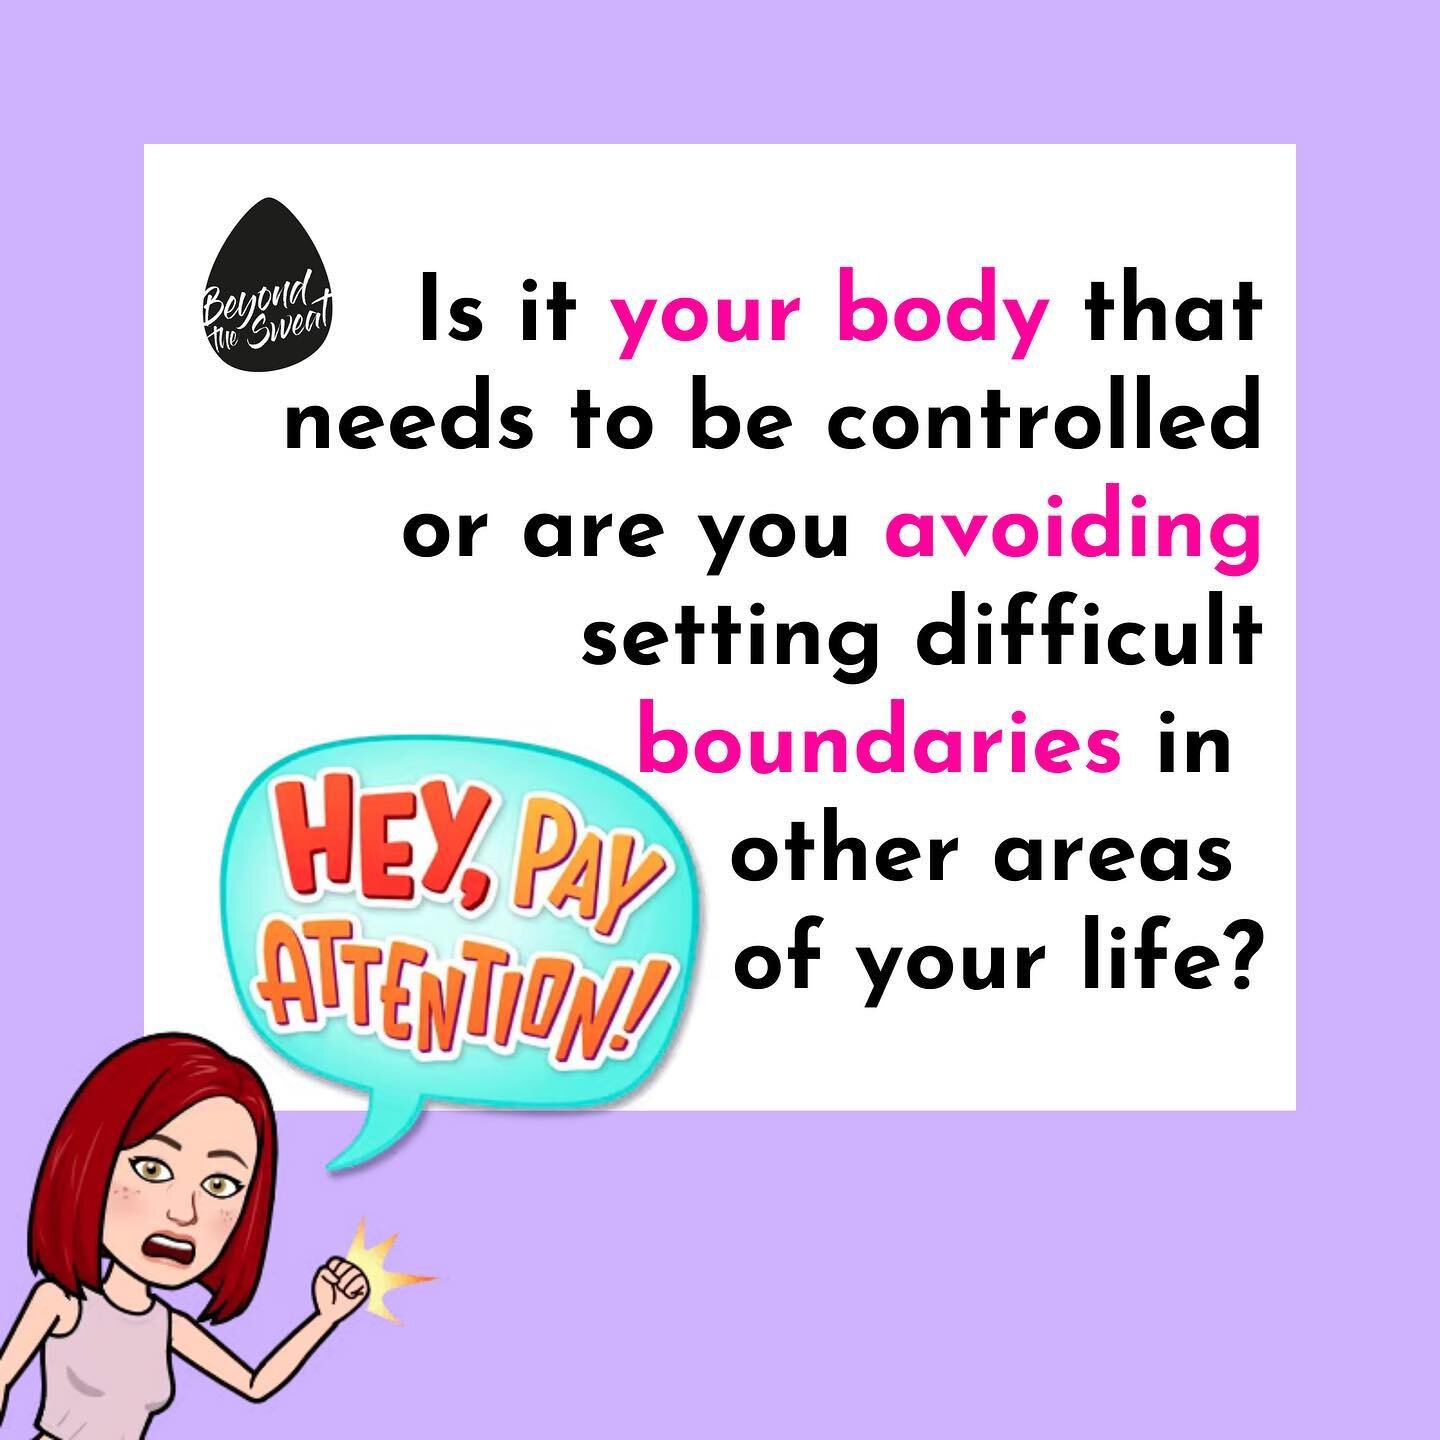 Is it your body that needs to be controlled or are you avoiding setting difficult boundaries in other areas of your life?

Sometimes when we are feeling out of control in other areas of our life, controlling our body becomes a proxy for that thing.

